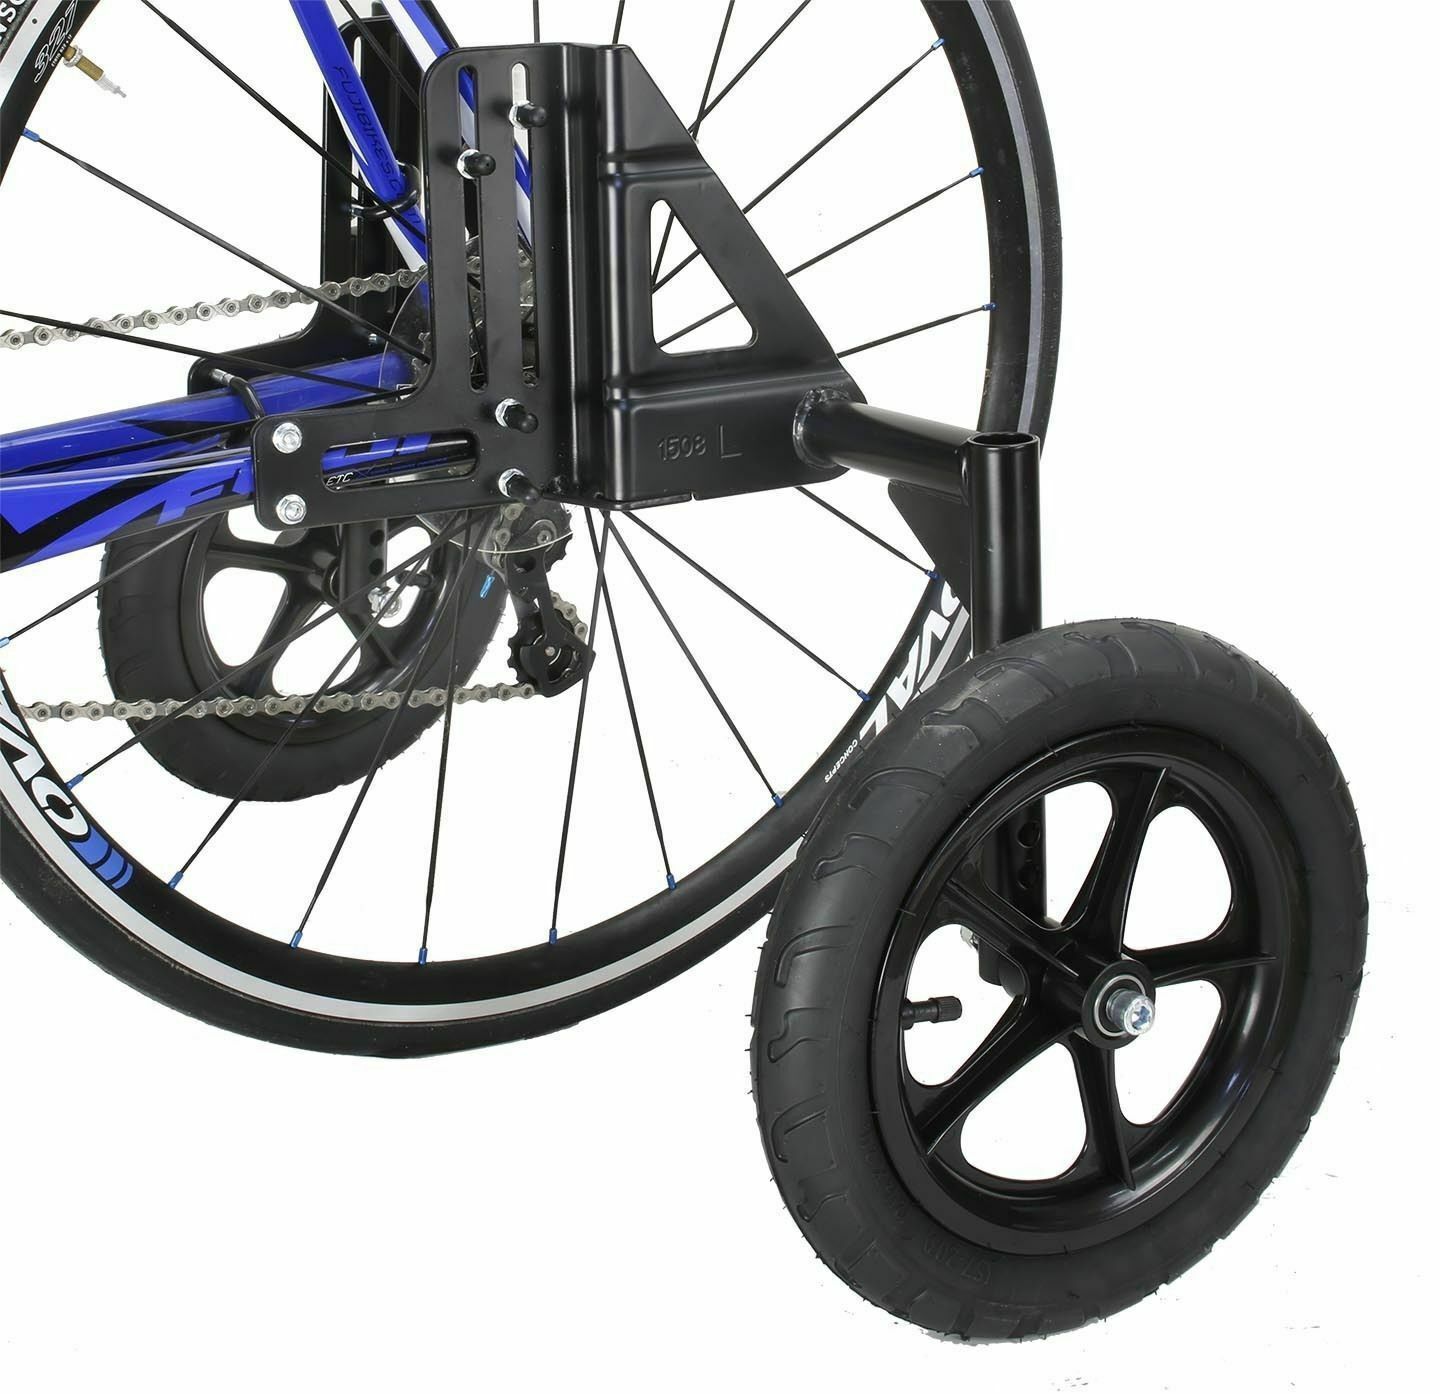 Cyclingdeal Adjustable Adult Bicycle Bike Training Wheels Fits